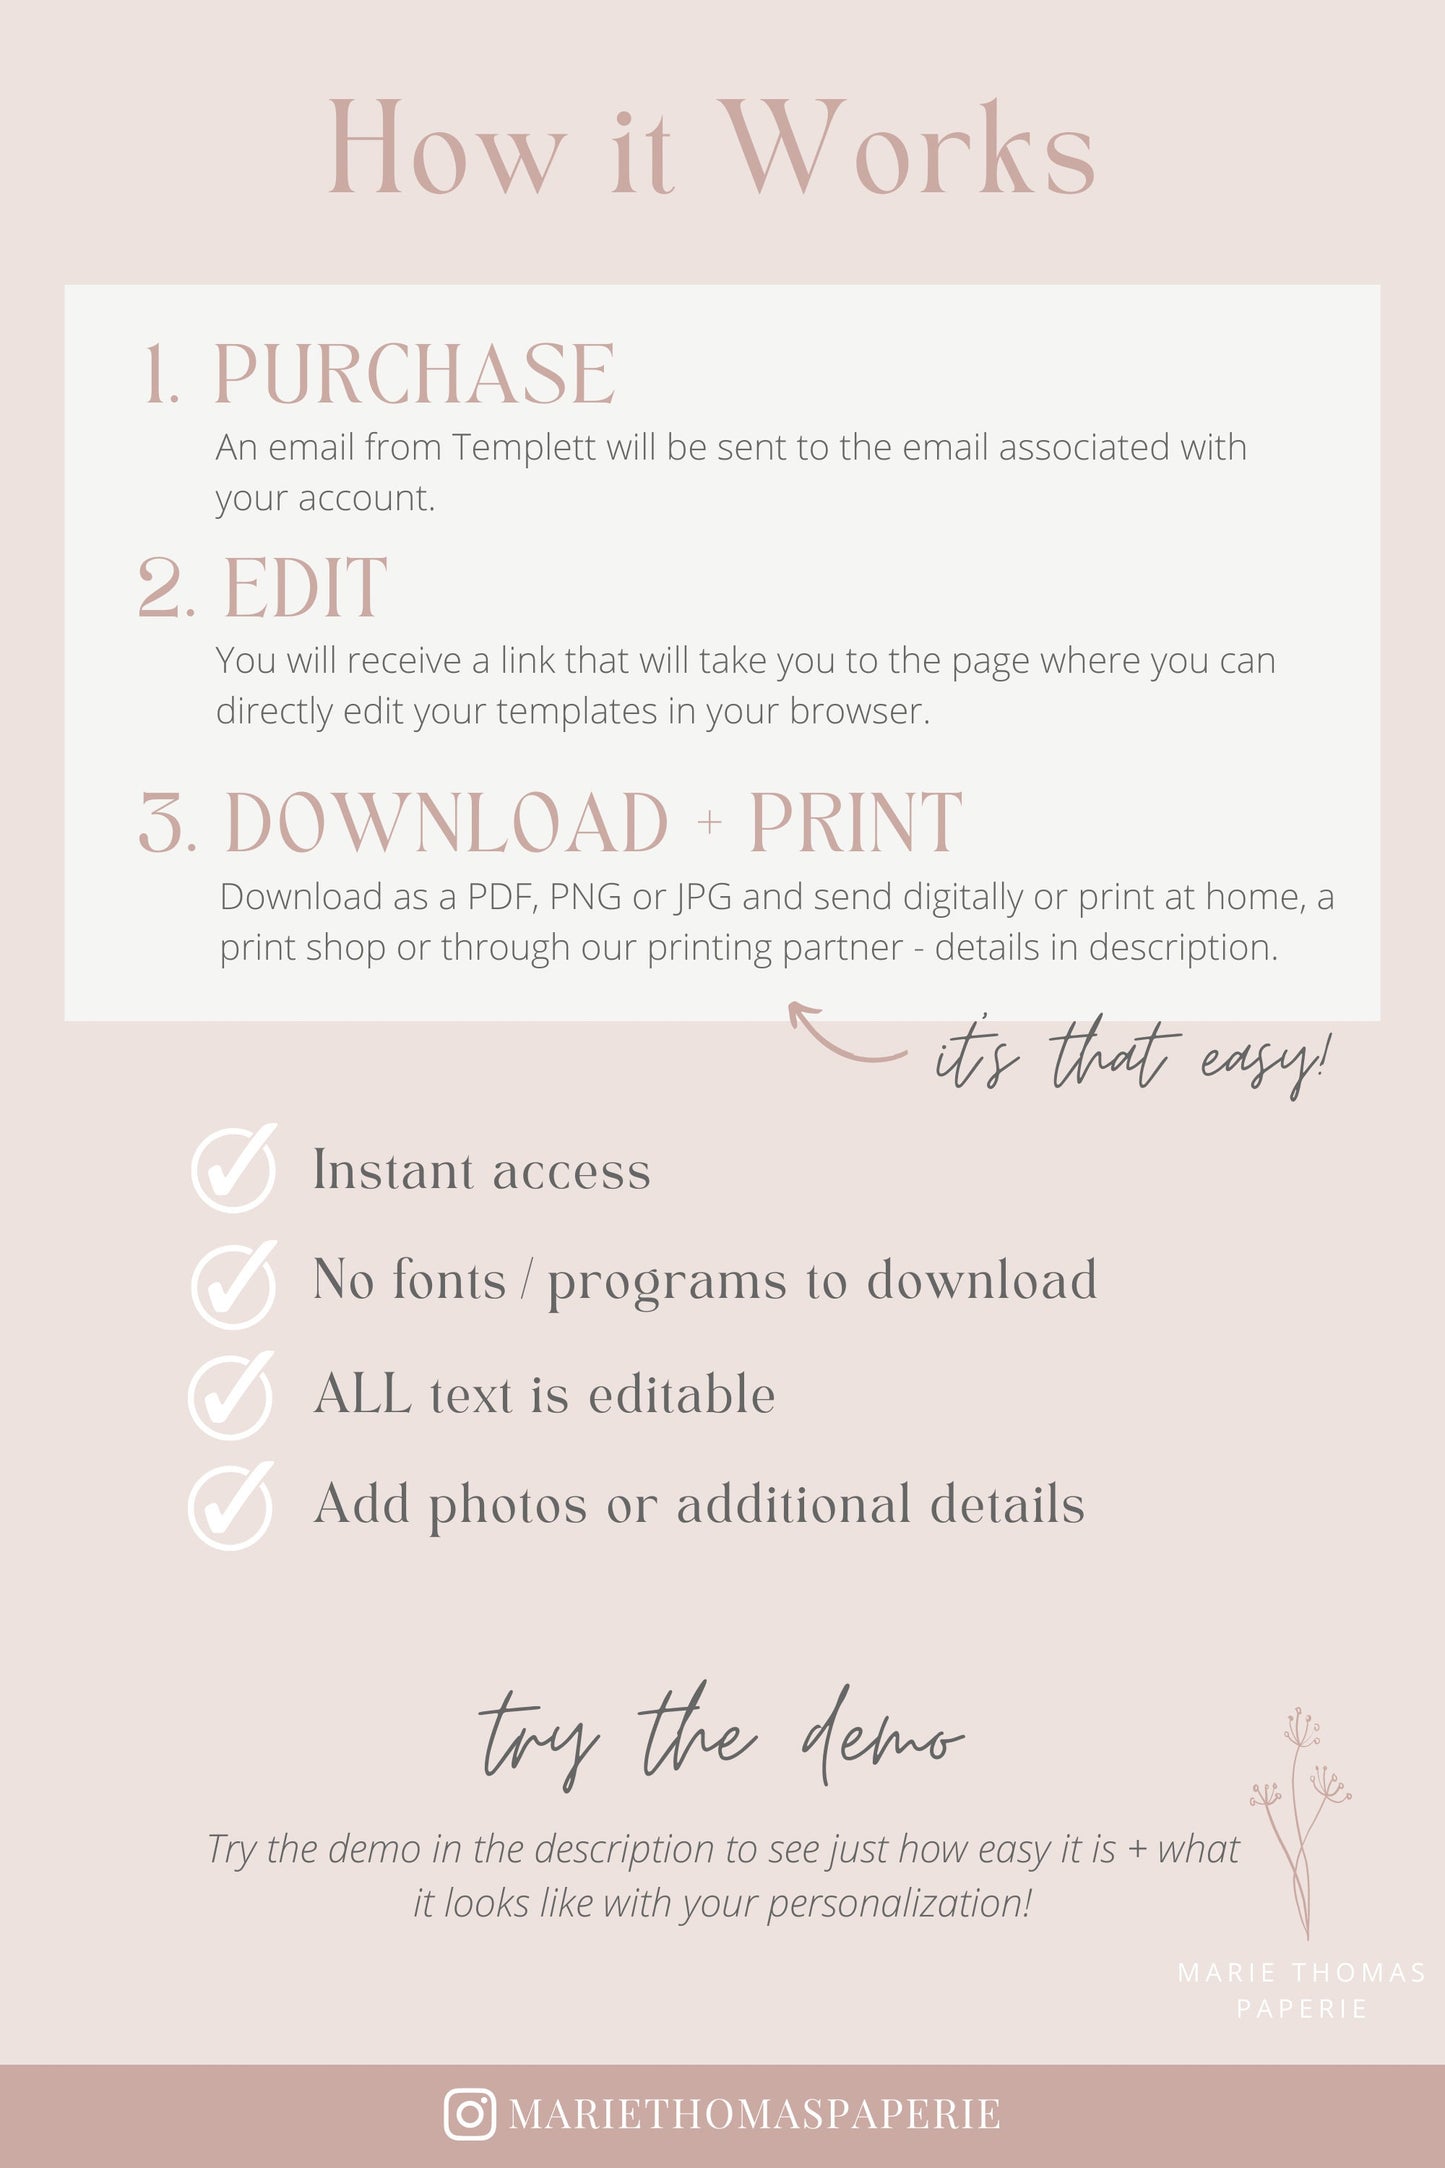 Editable   Advice for the Bride Bridal Shower Games Sunflower Advice Cards Template